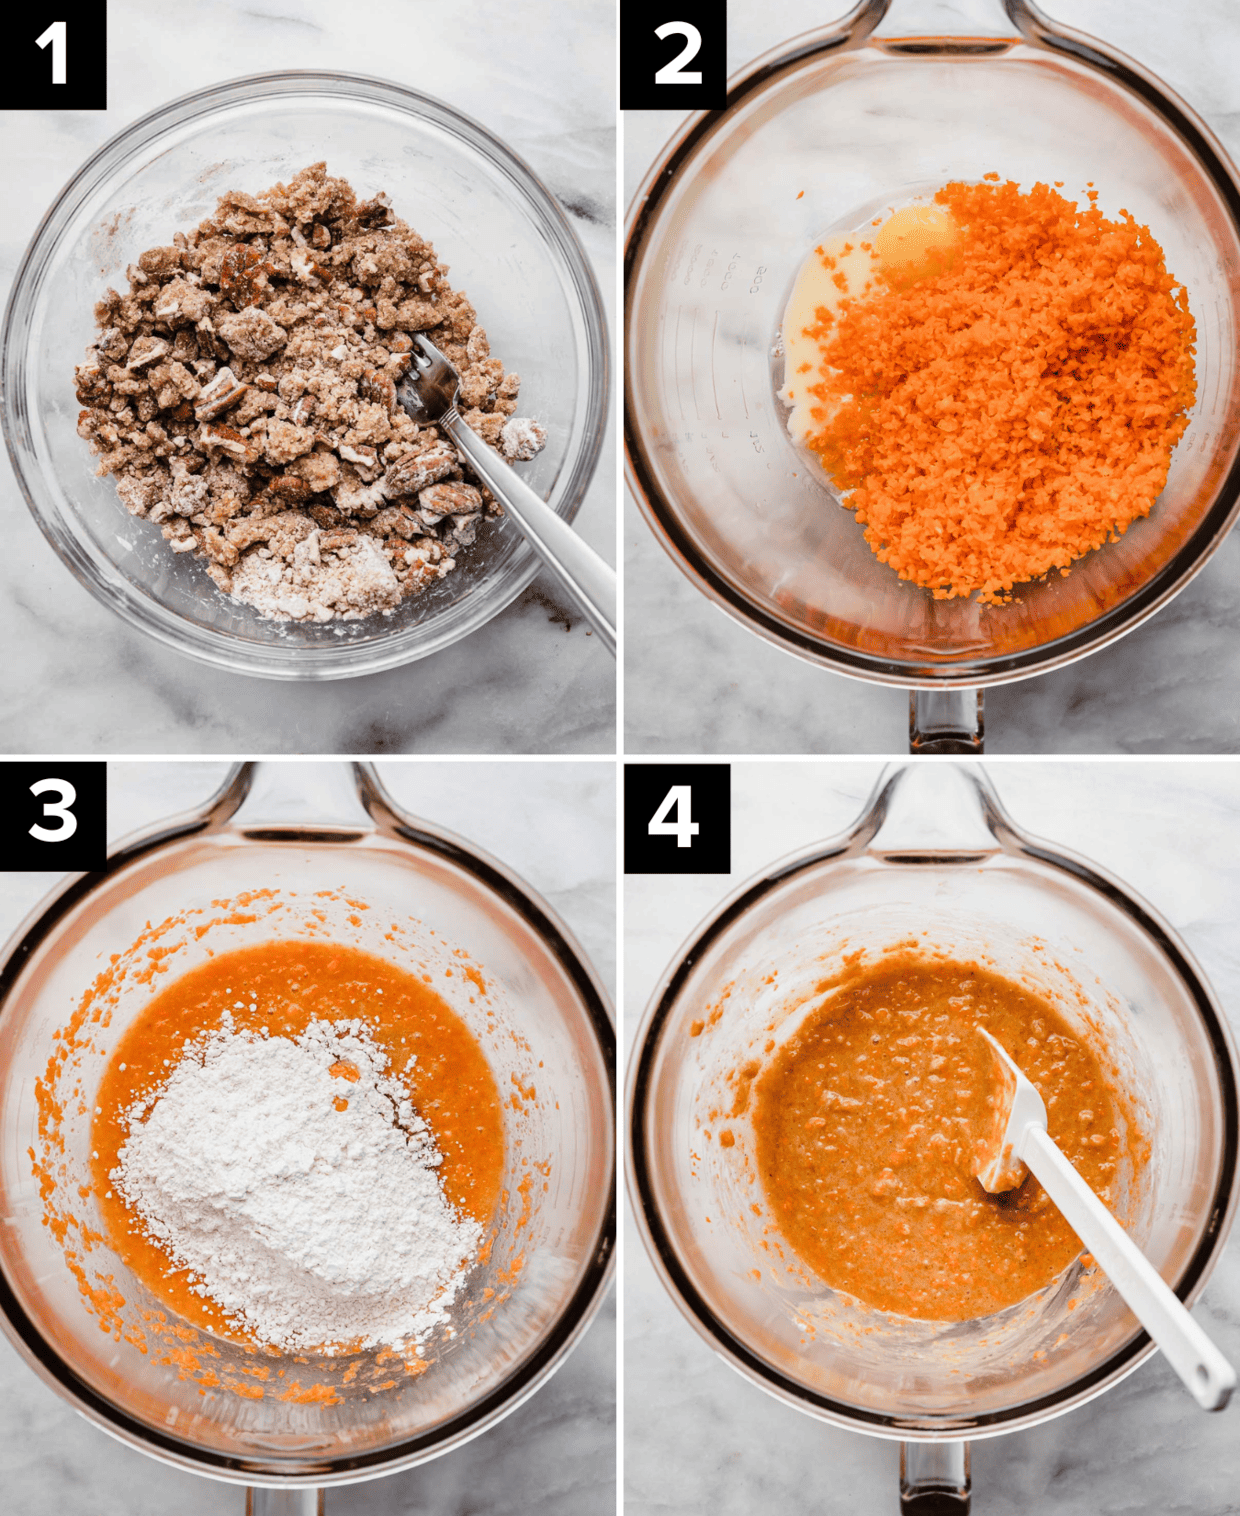 Four images showing the process of making an orange Carrot Coffee Cake batter in a glass bowl on a white background.